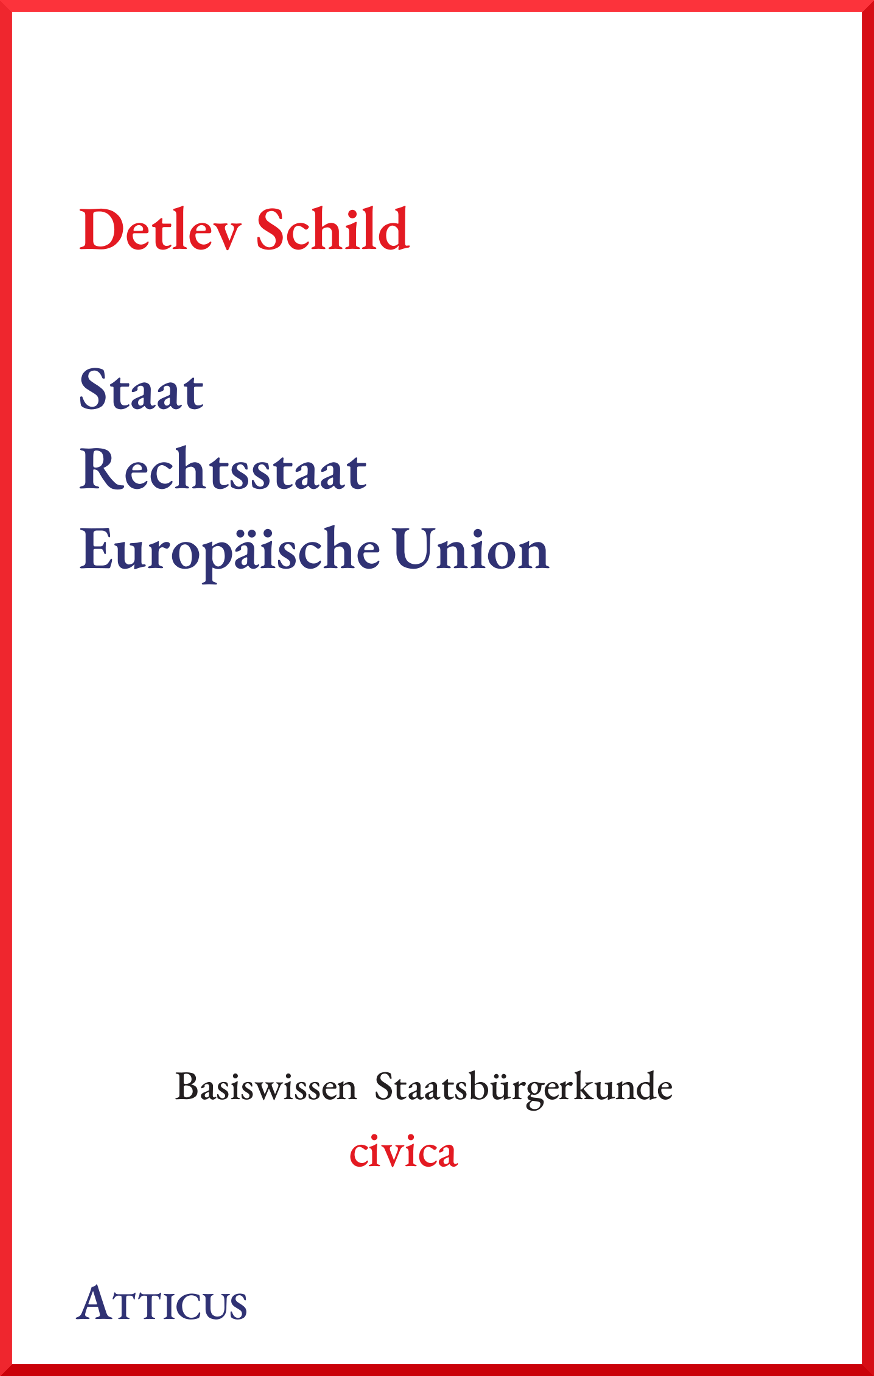 0_Umschlag_Staat_Cover_150dpi_w850_mitRotemRand.png